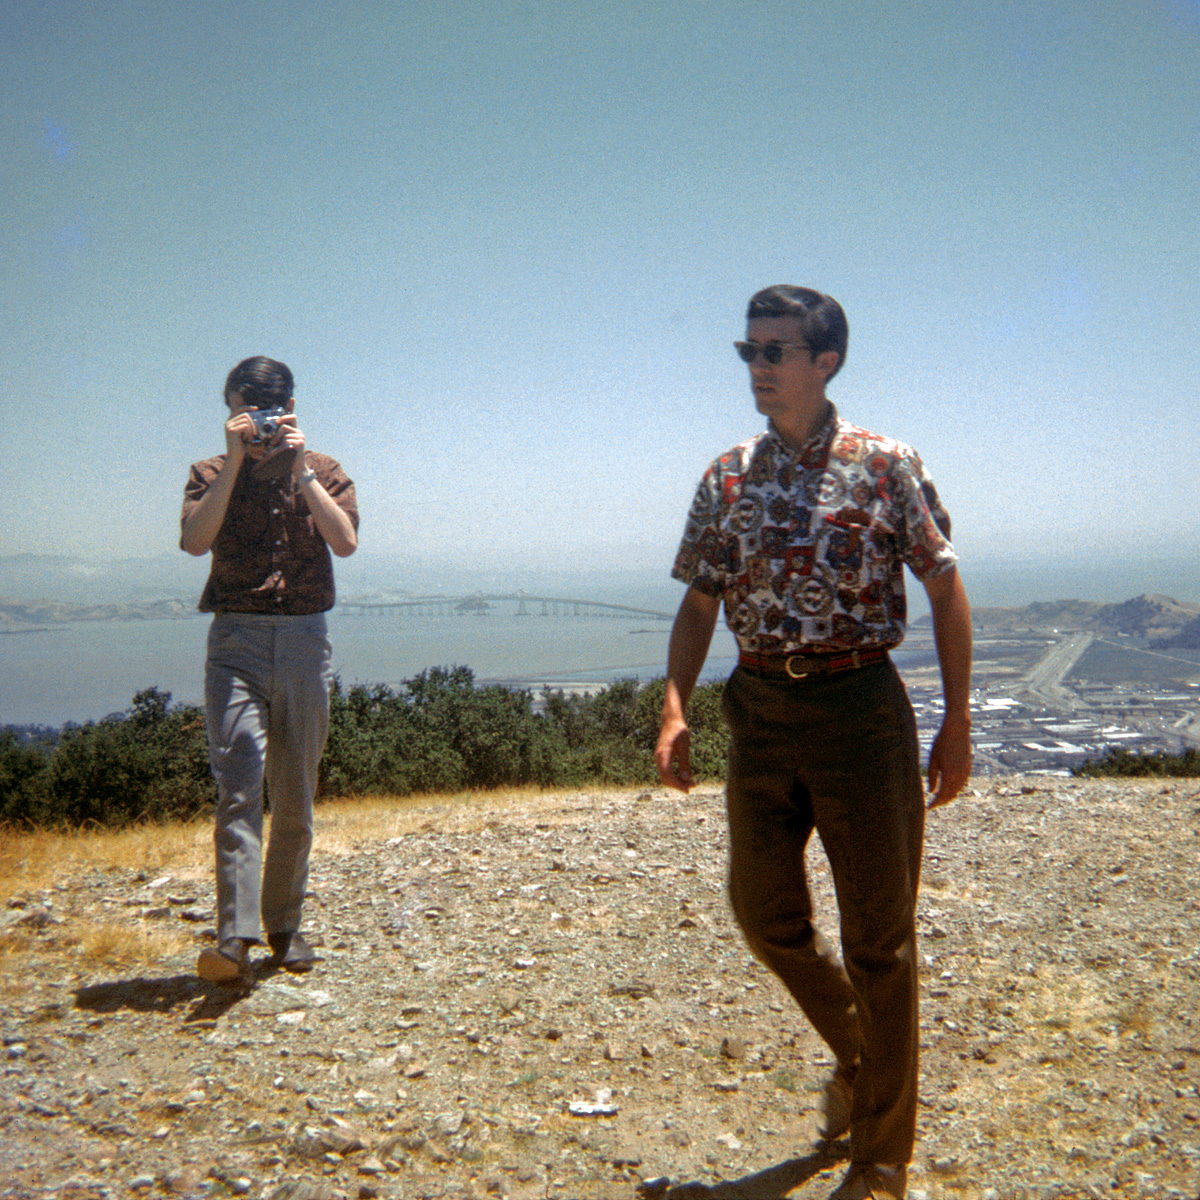 A rare photo of me actually wielding a camera, in this case my Retinette, in 1967 atop a hill overlooking San Rafael, Calif., with the Richmond-San Rafael Bridge in the background. I'm not really aiming at my brother here, but at my friend while he was taking this 126 Kodachrome slide. I wasn't quick enough, and didn't get the shot. View full size.